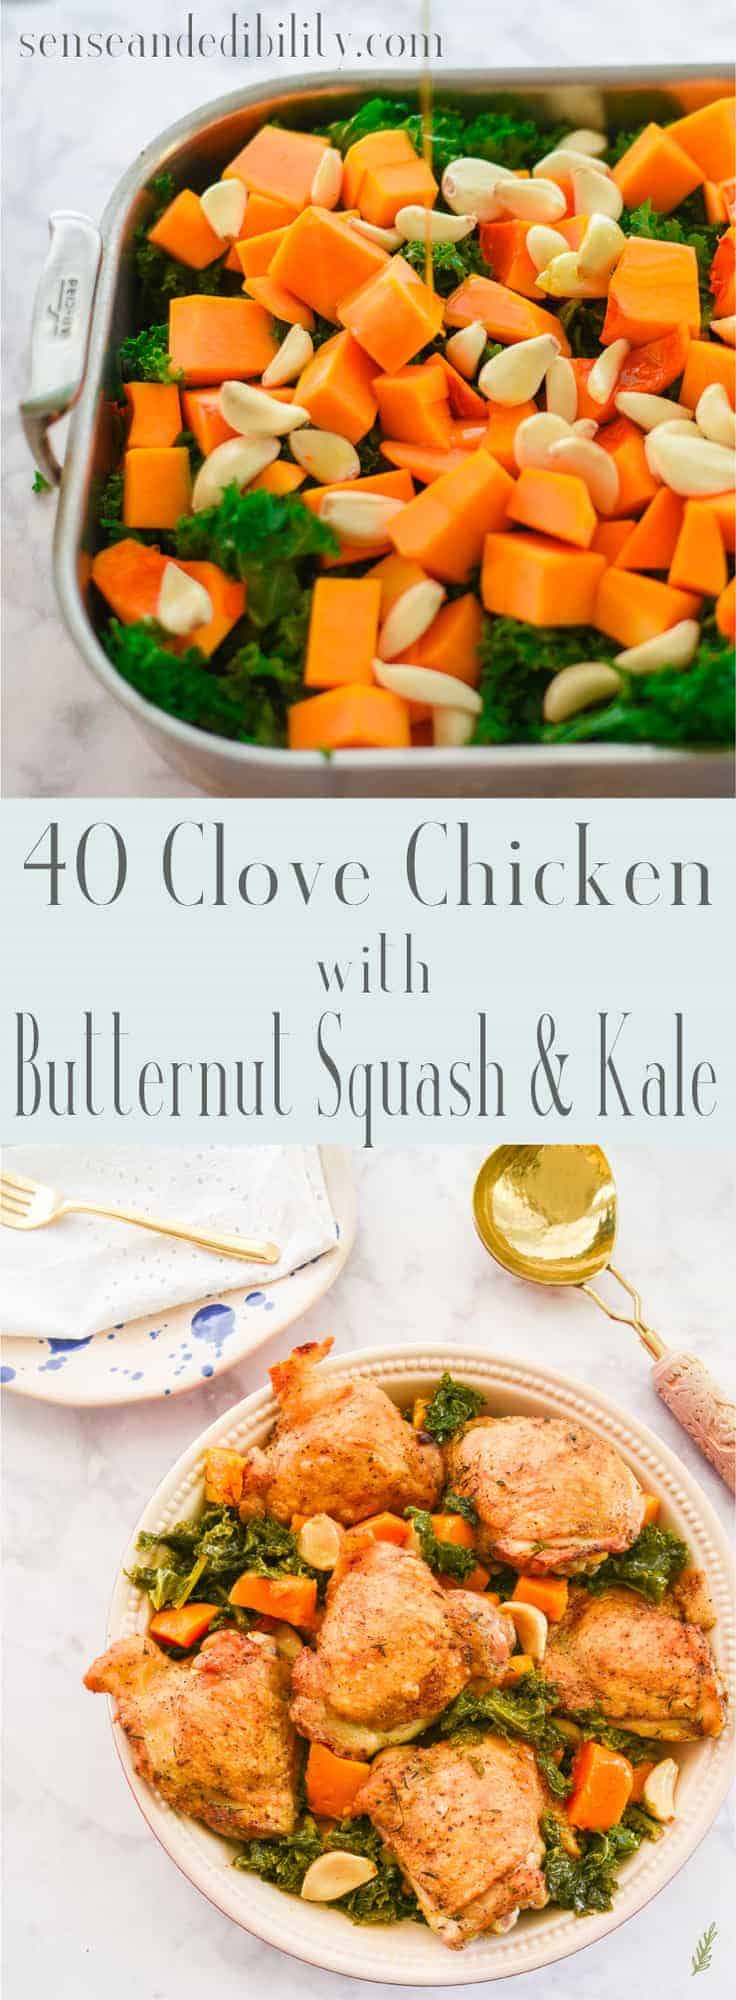 Sense & Edibility's 40 Clove Chicken with Kale and Butternut Squash Pin